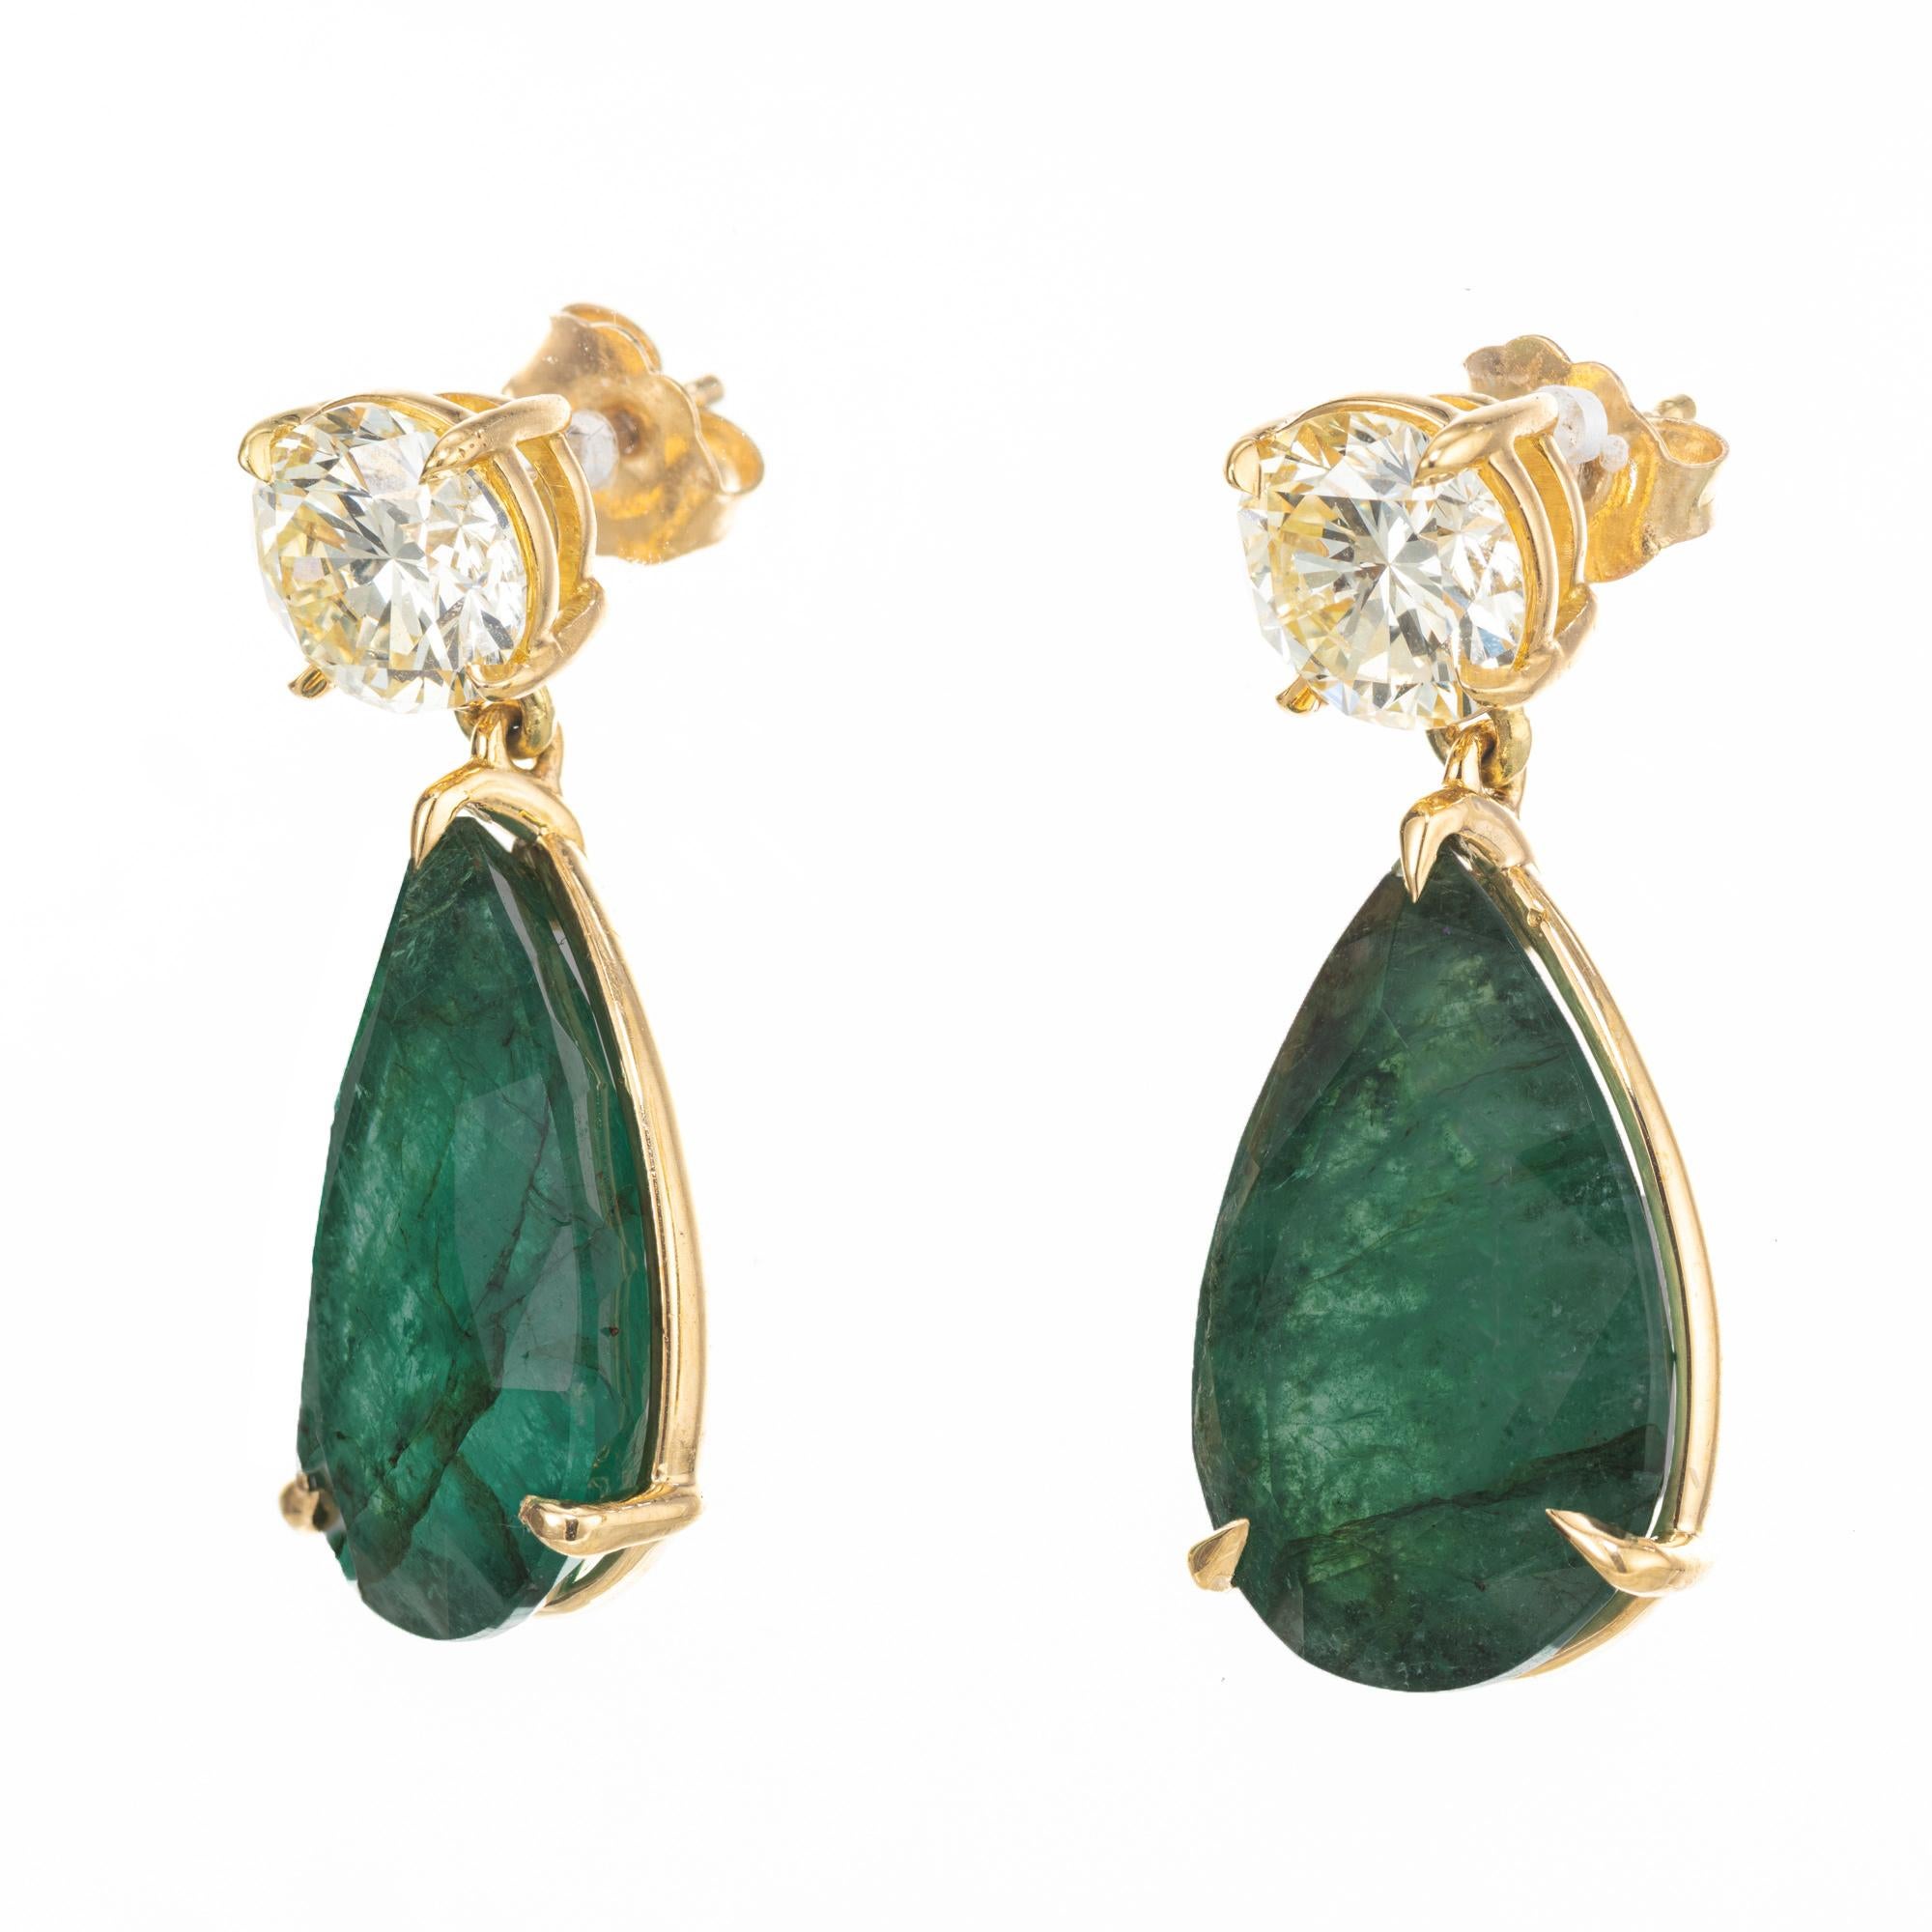 Spectacular emerald and diamond dangle earrings. 2 GIA pear shaped emeralds one weighing 8.04 carats and other one at 7.51cts, set in 18k yellow gold three prong settings. Both gemstones have a rich green color, one stone has minor clarity